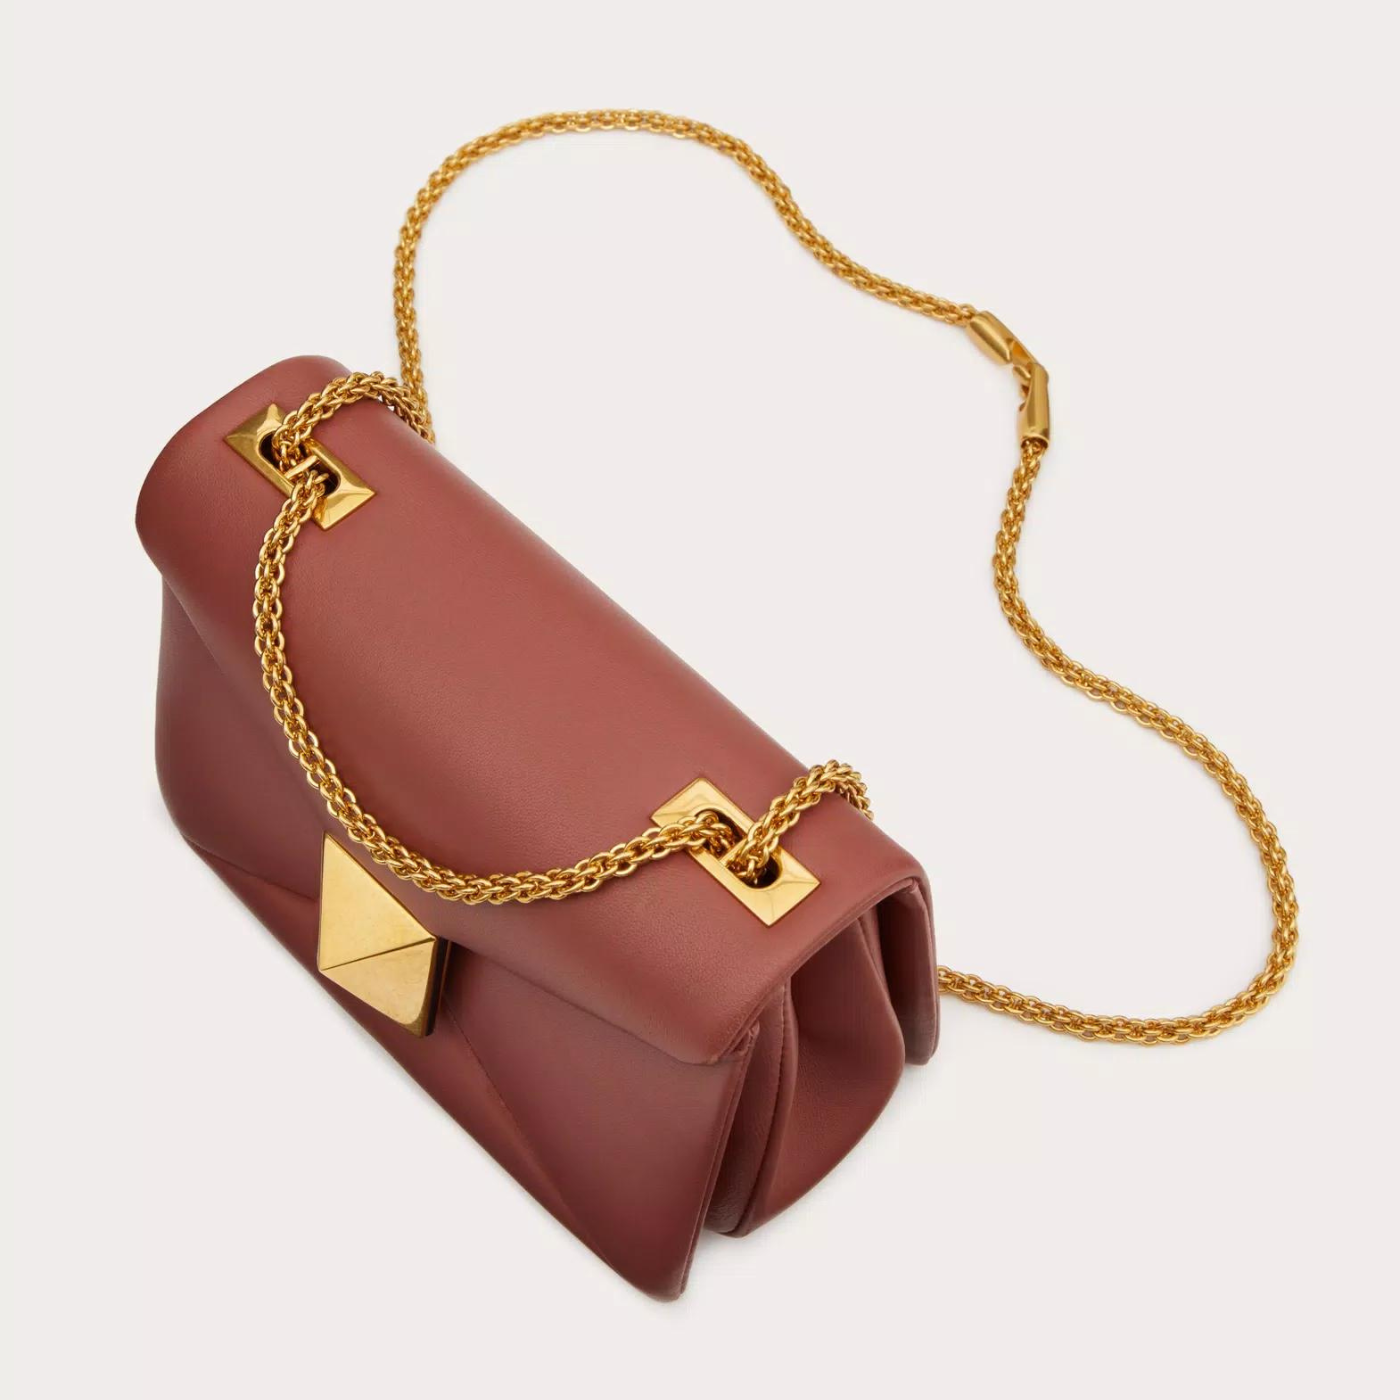 One Stud Nappa Bag With Chain In Gingerbread Handbags VALENTINO - LOLAMIR